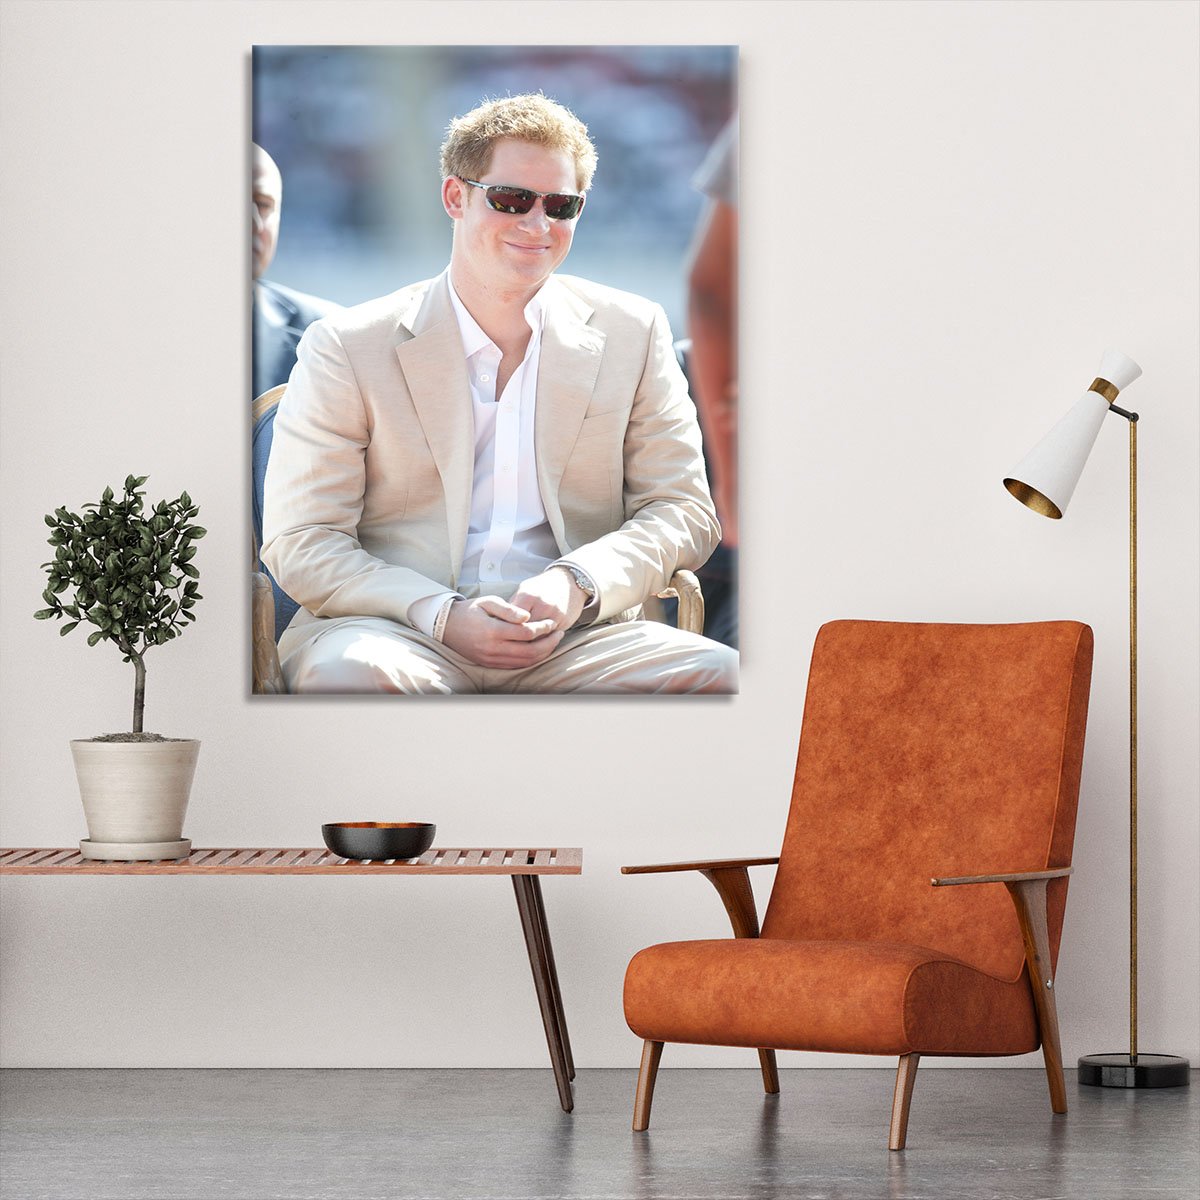 Prince Harry during the Diamond Jubilee tour in the Bahamas Canvas Print or Poster